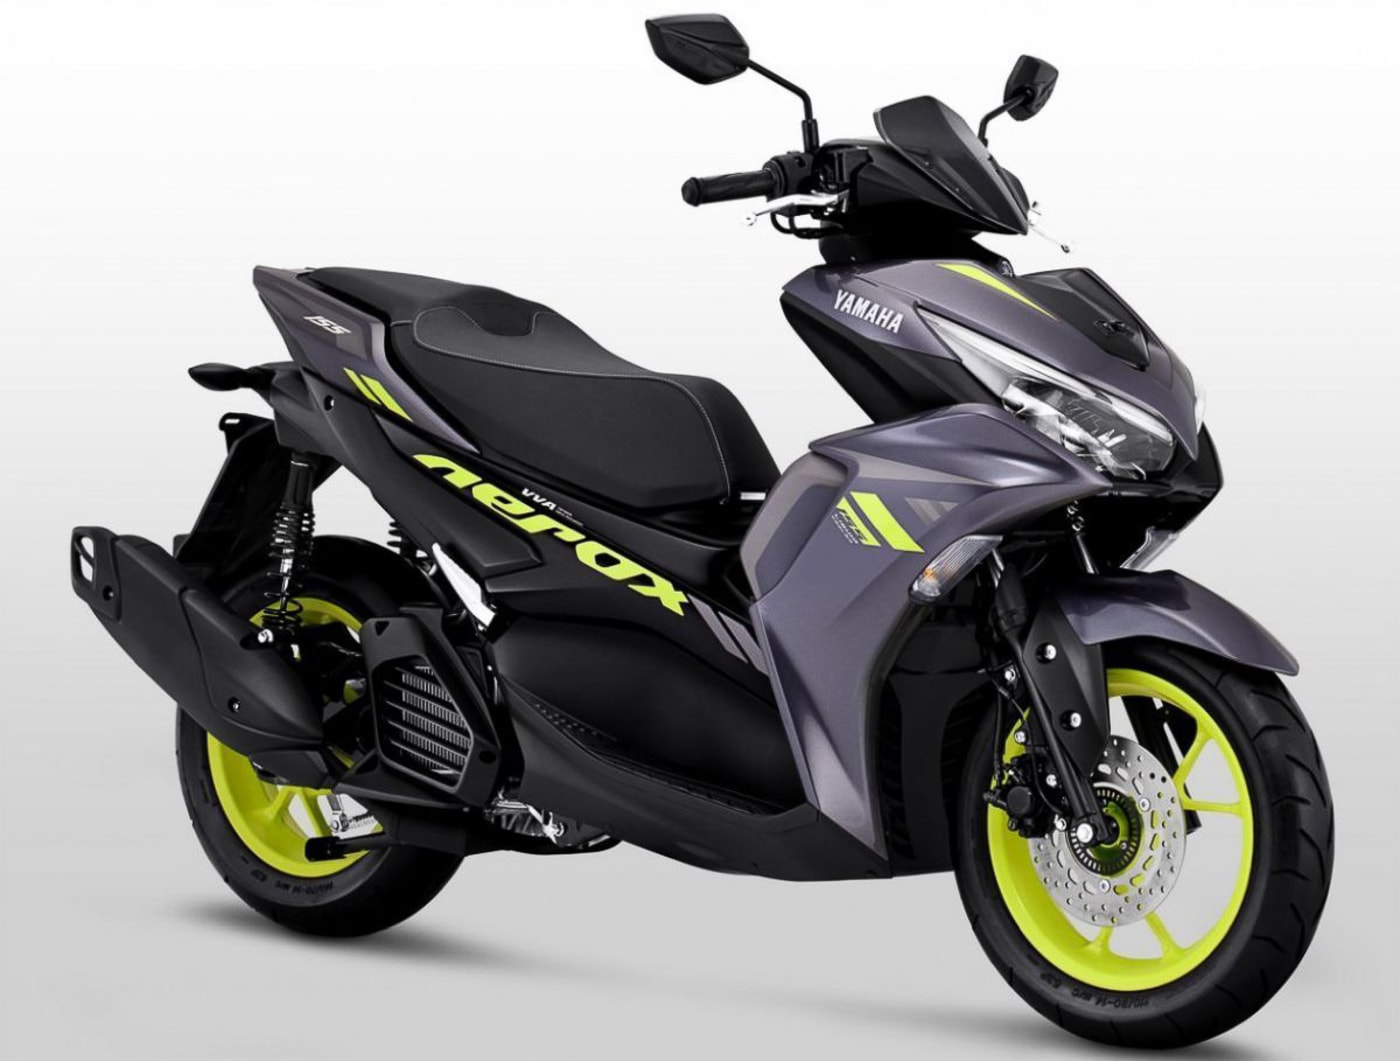 Yamaha R15-based Aerox 155 Scooter Launched - Details